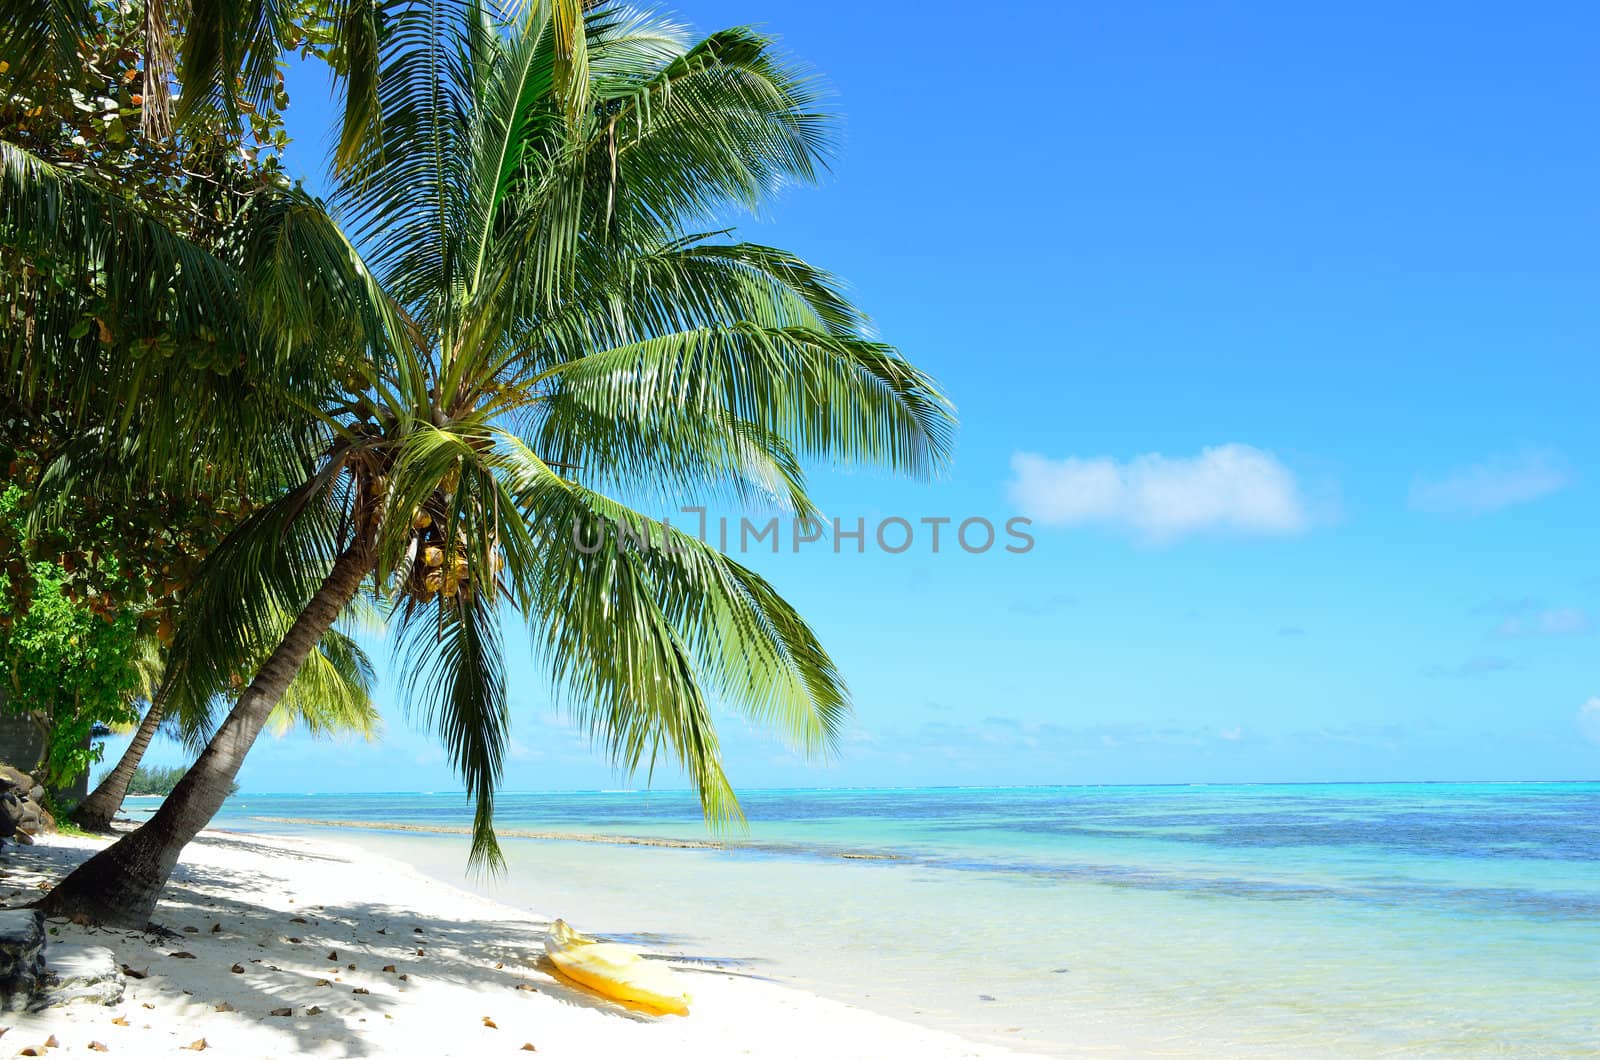 Watersport kayak under a palm tree on a tropical white sand beach with a blue sea on Moorea, an island of the Tahiti archipelago French Polynesia.